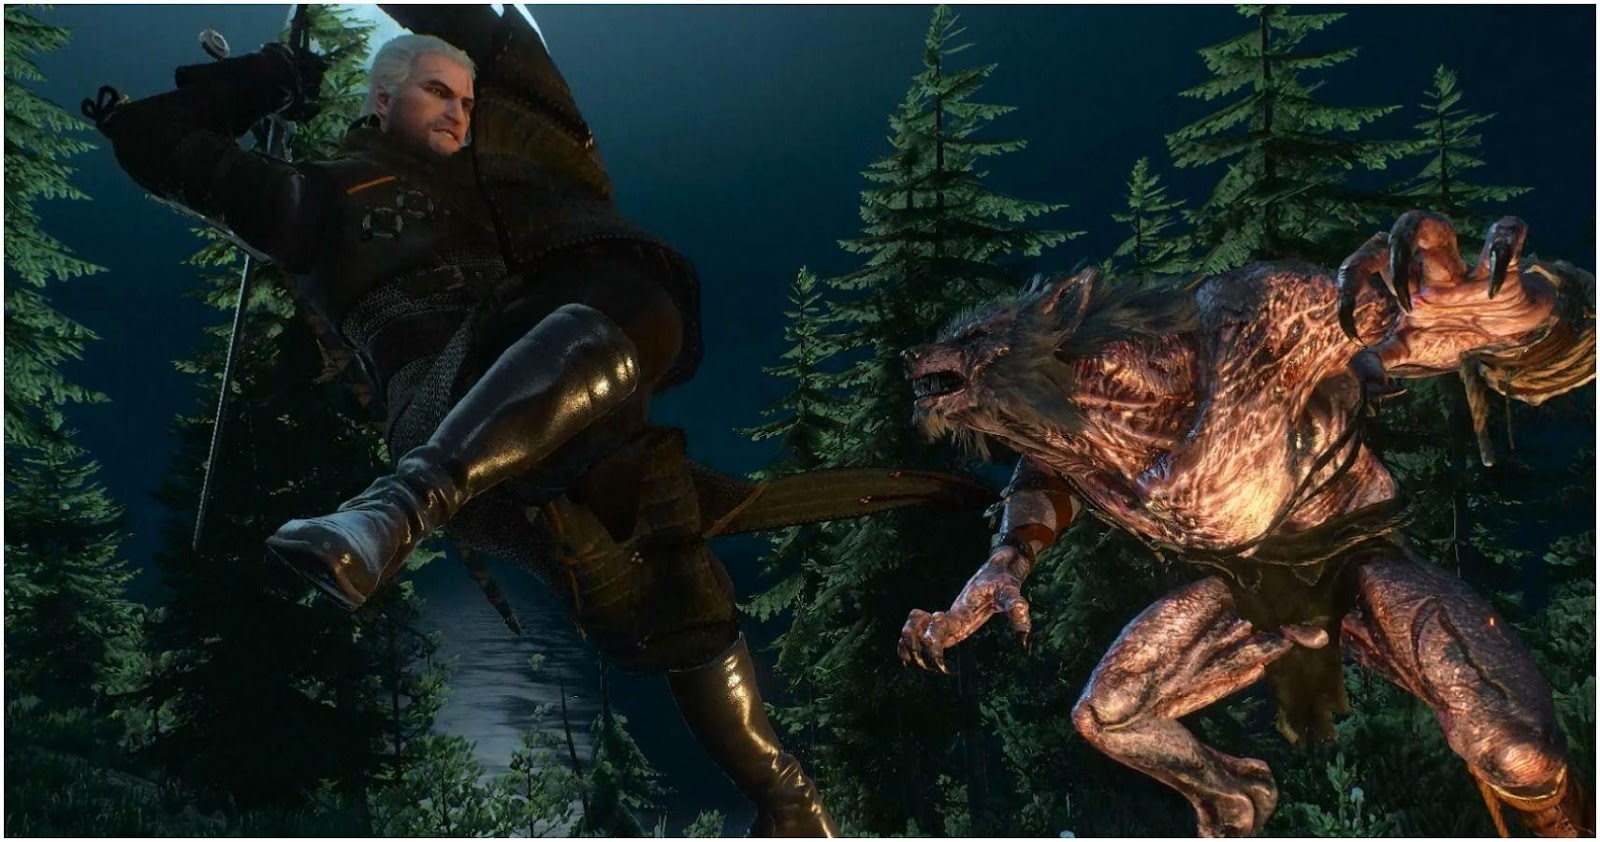 The Witcher: 10 Unanswered Questions We Still Have About Werewolves